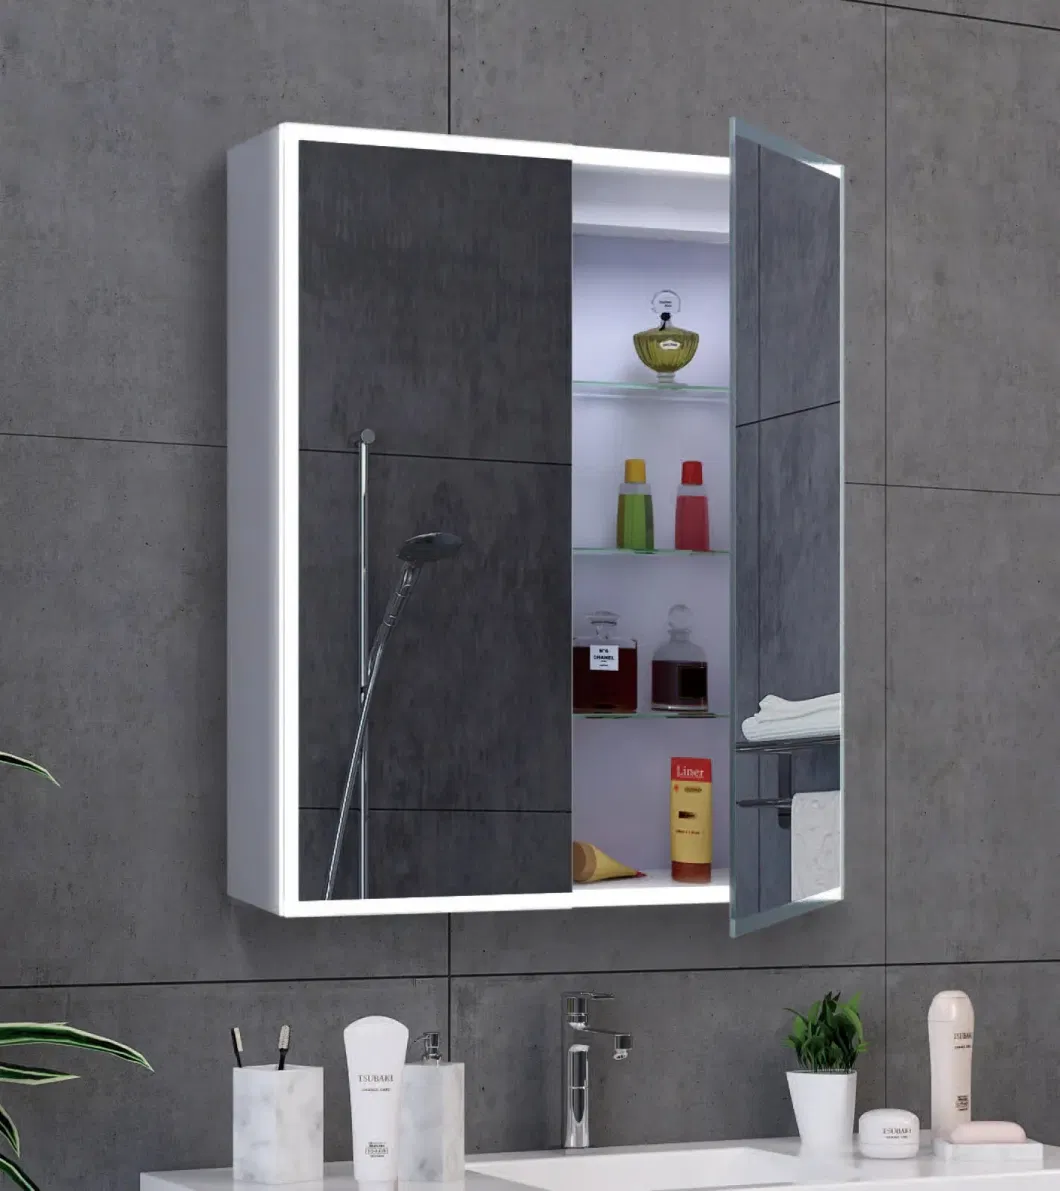 OEM Modern LED Mirror Round LED Mirror Wall Mounted Touch Switch Smart Mirror for Bathroom with LED Light